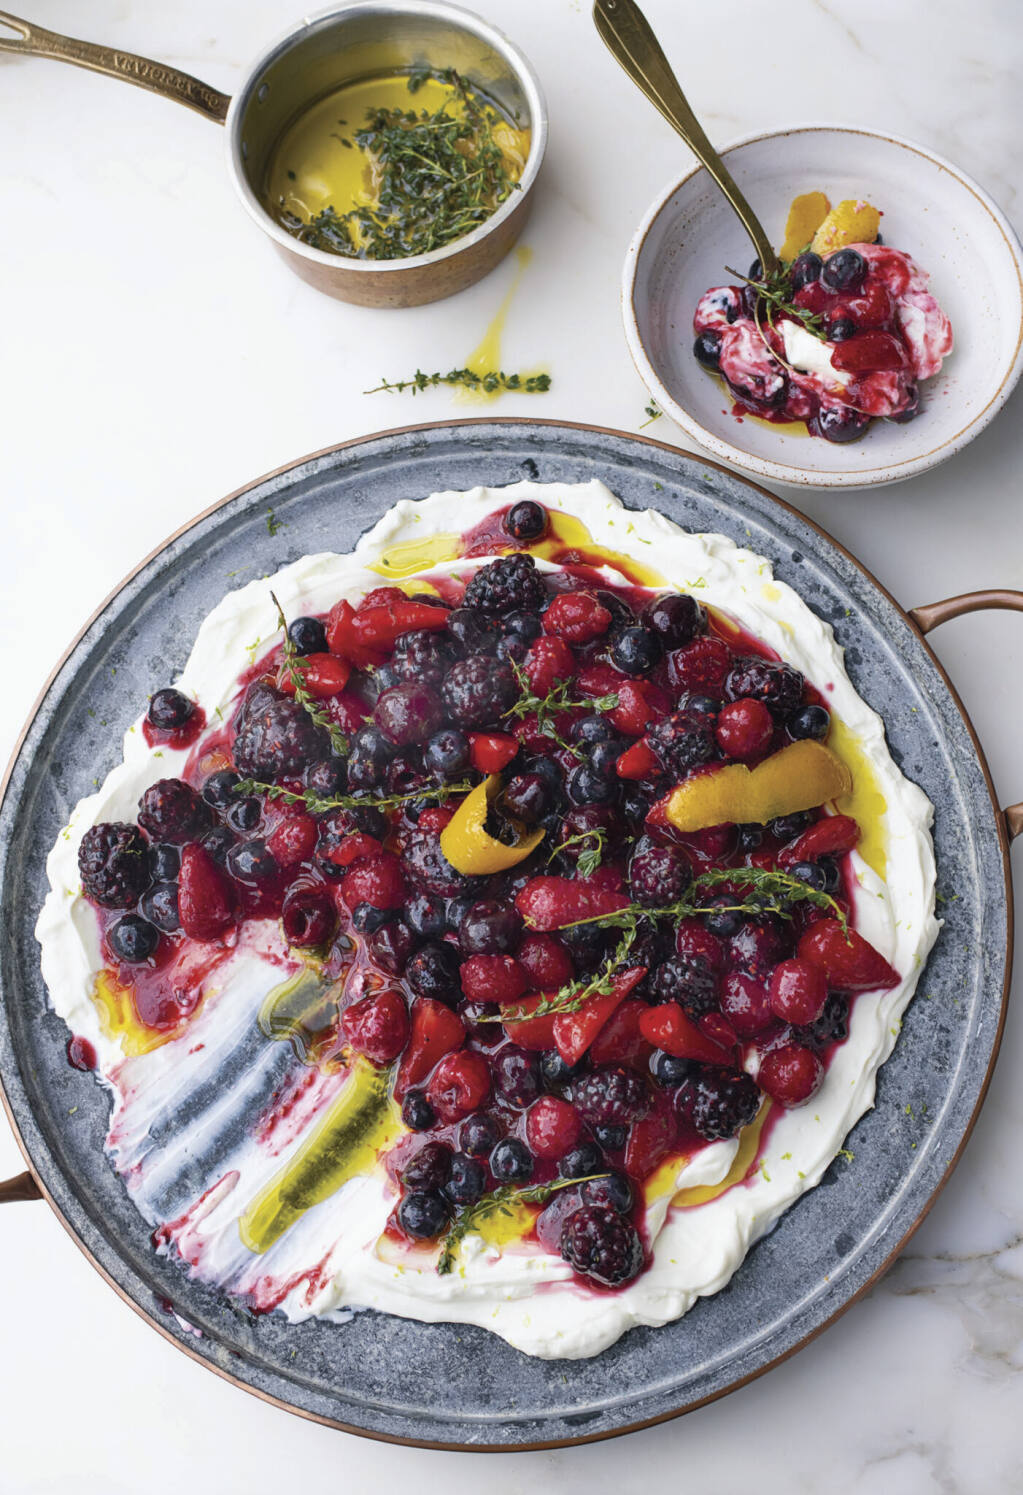 Cooking with 'Flavor': Renowned chef, author Yotam Ottolenghi swings by  Santa Rosa on book tour